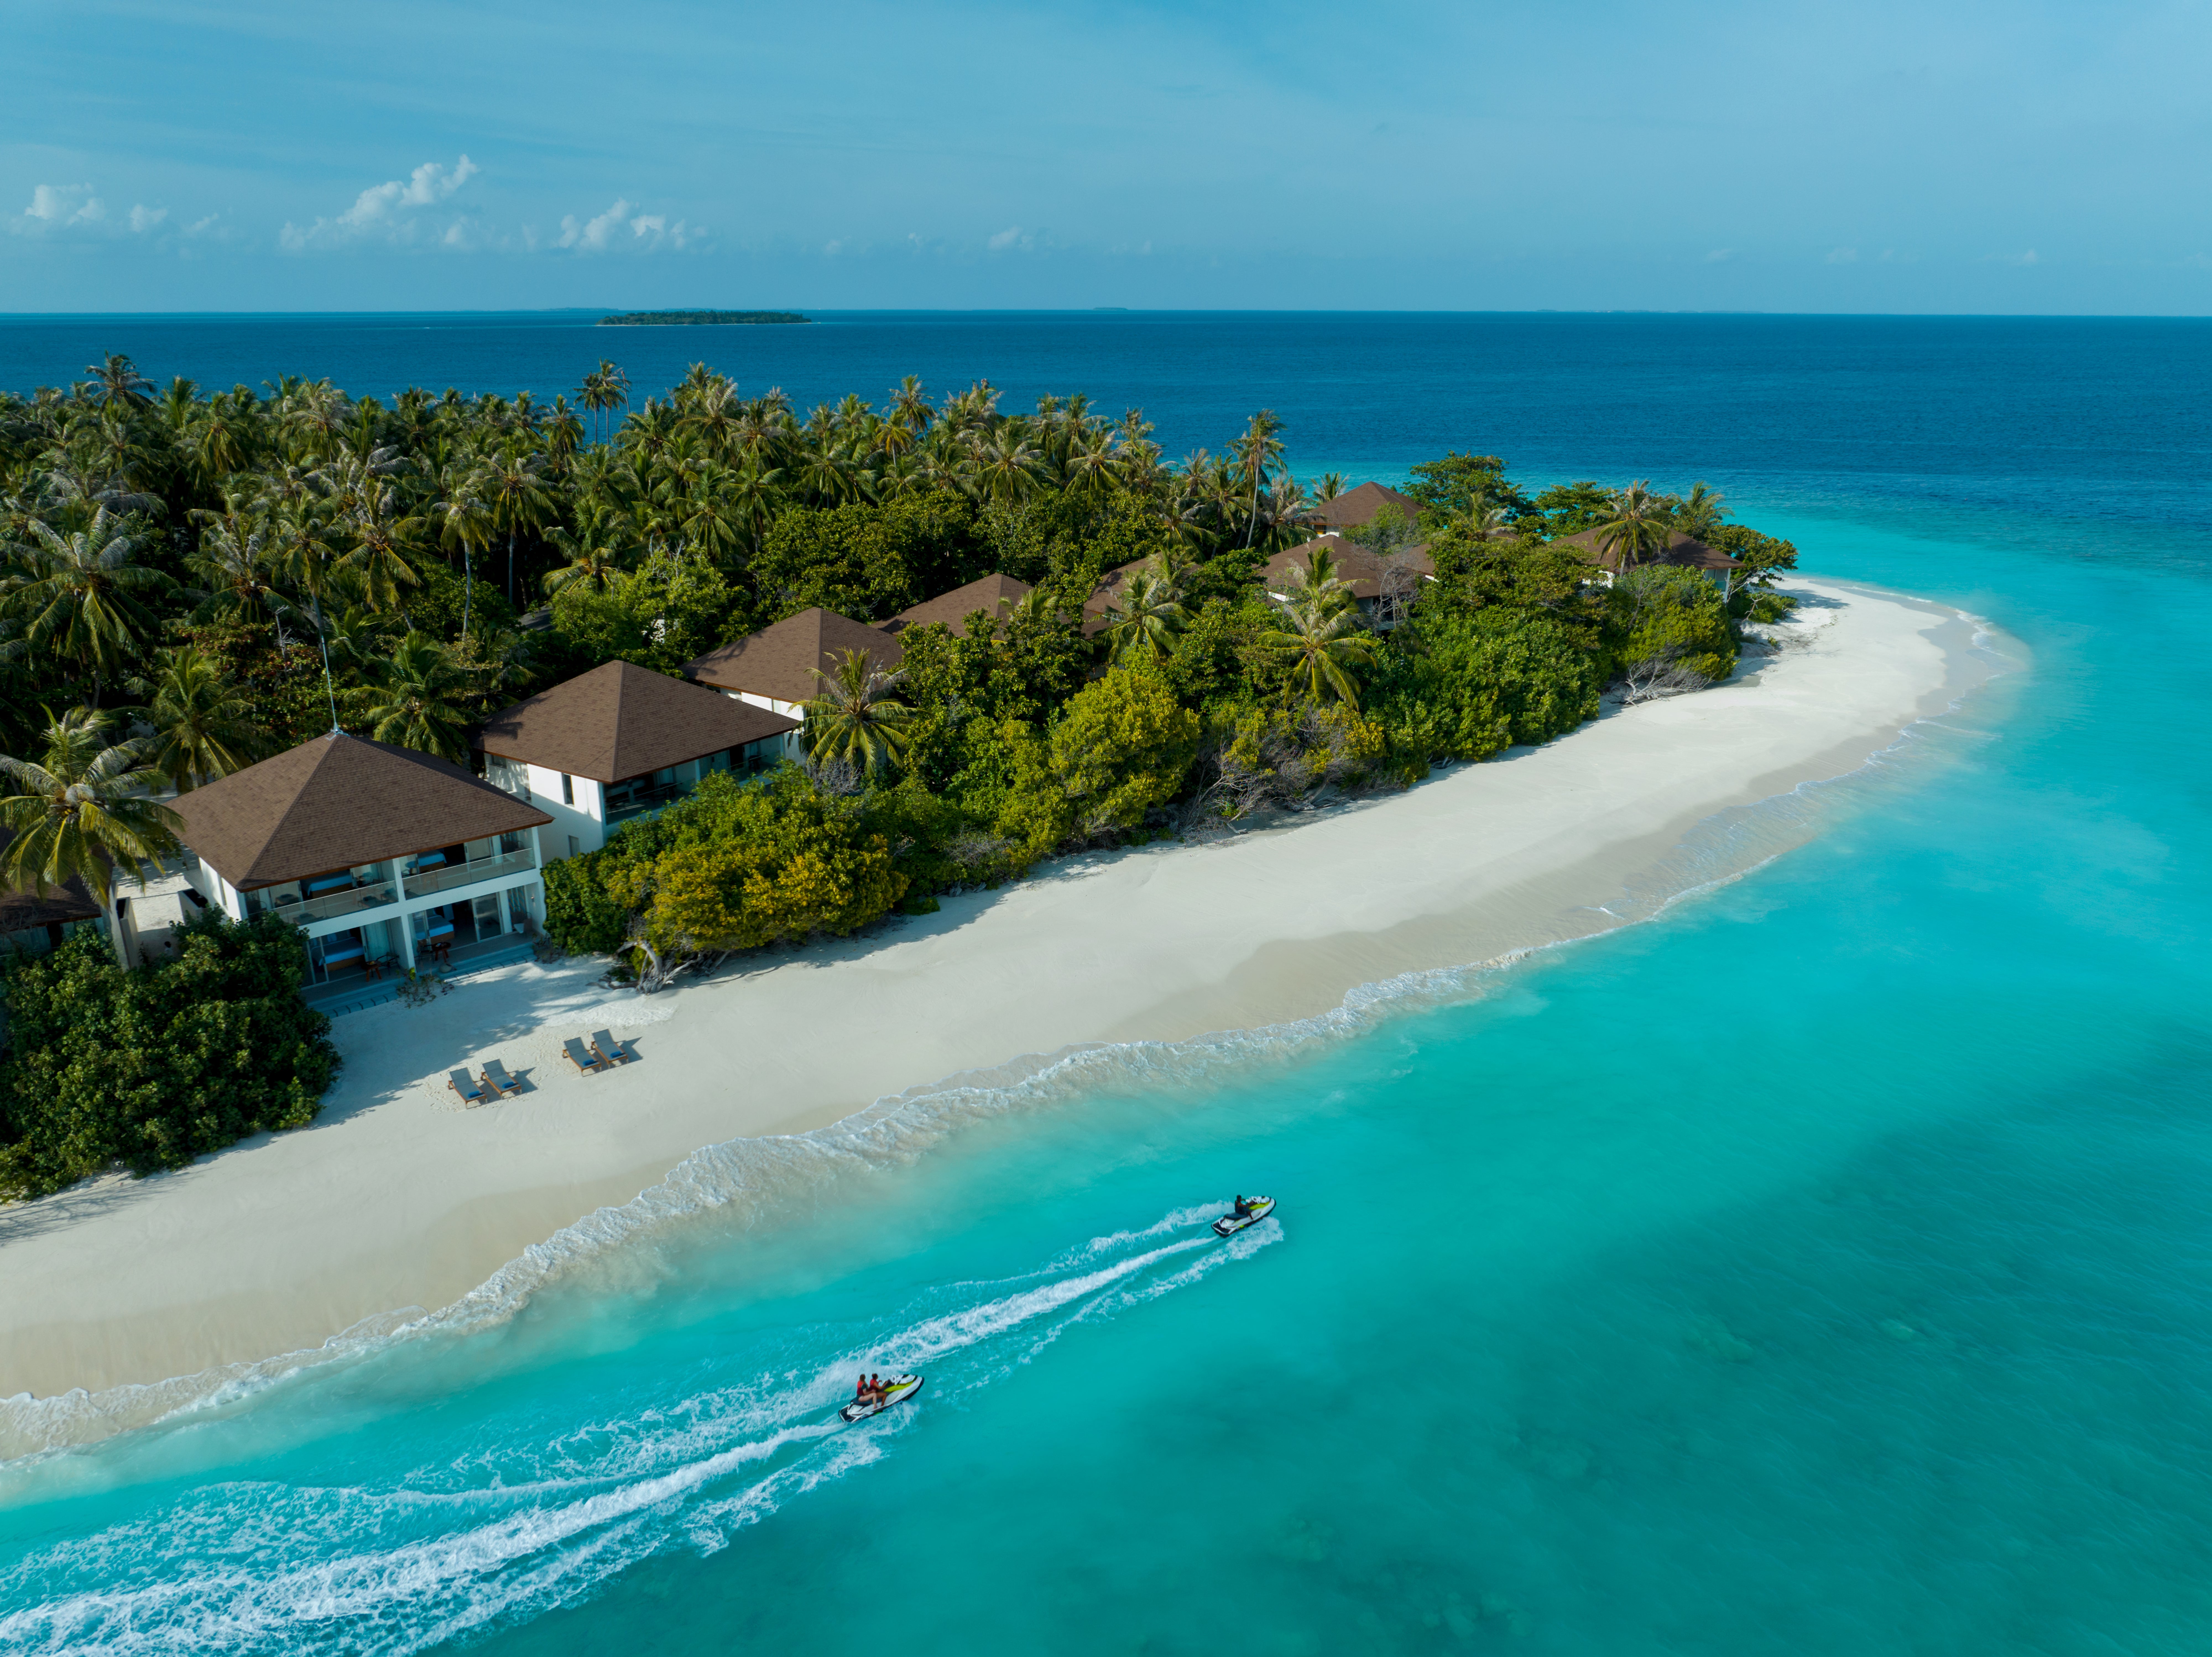 Anna and Gracie were staying at the Avani+ Fares Maldives Resort in Baa Atoll